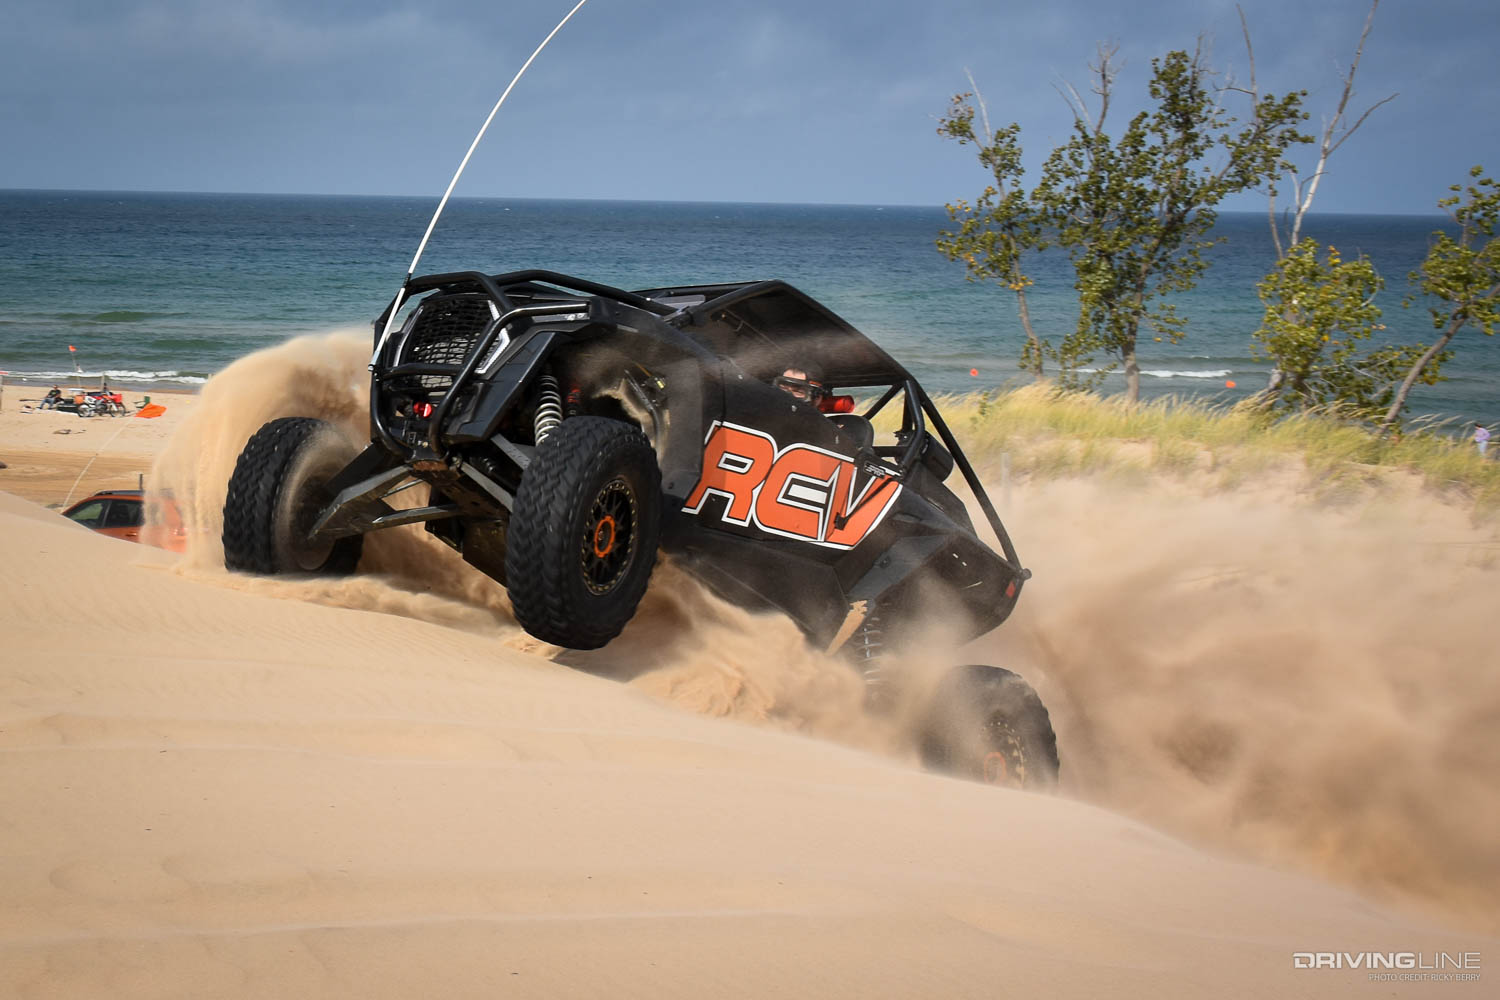 How Much Air to Let Out of Tires on Sand 